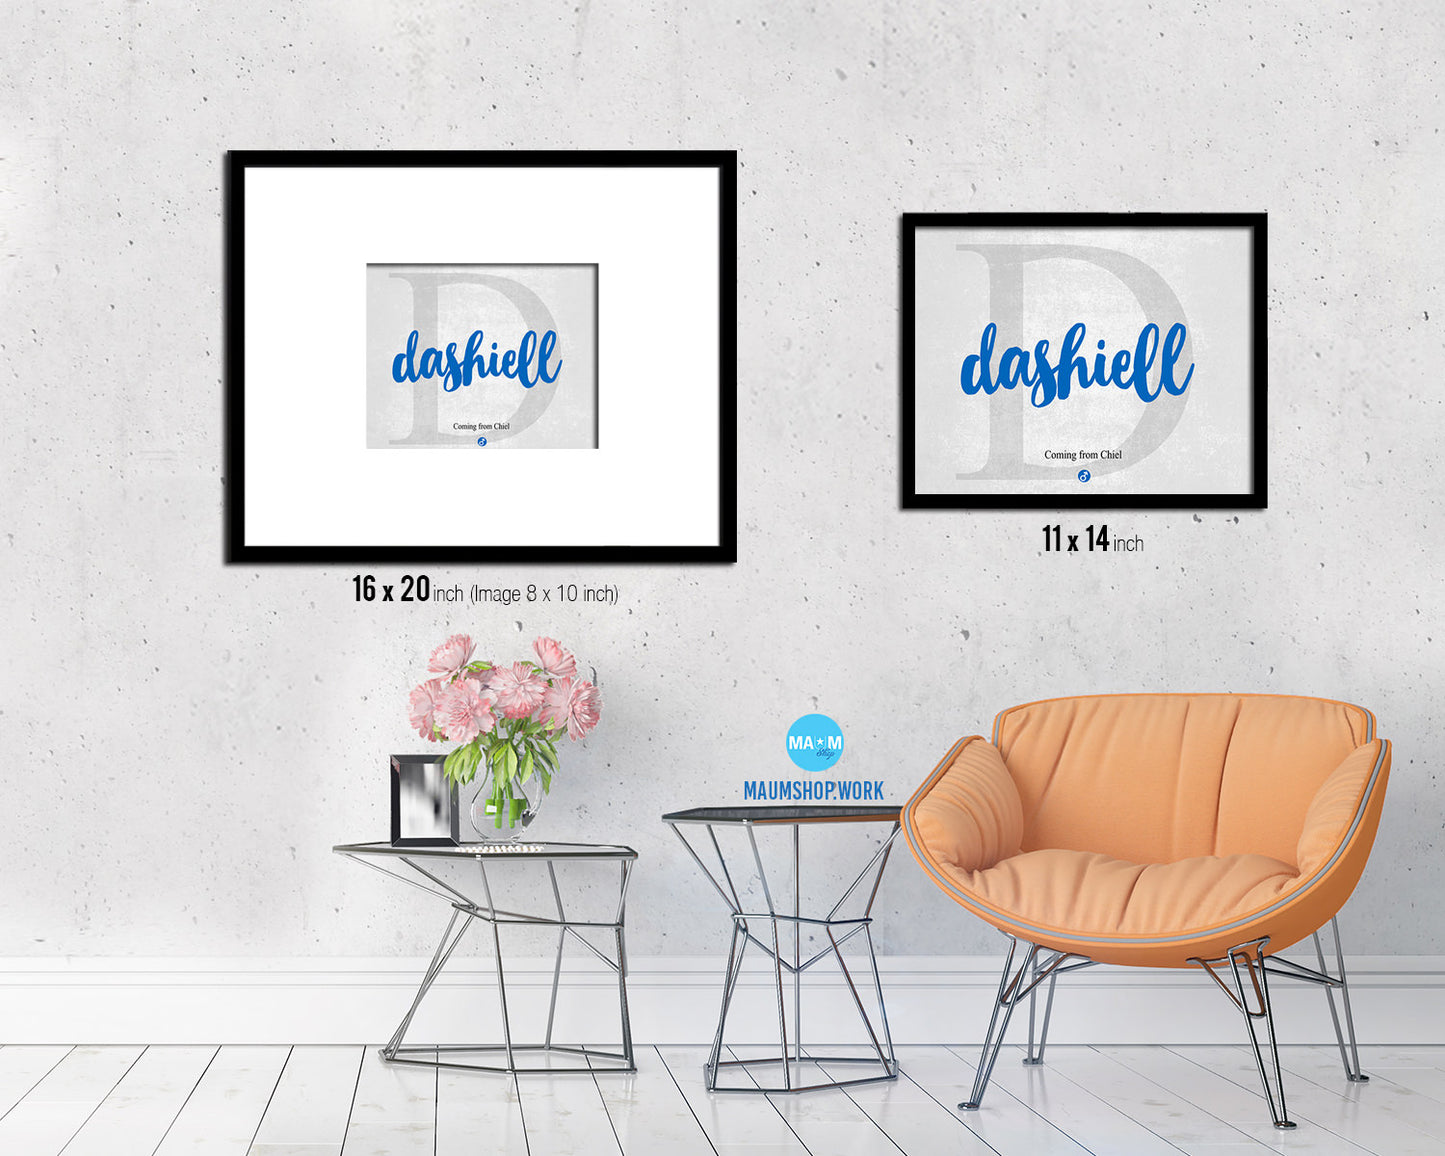 Dashiell Personalized Biblical Name Plate Art Framed Print Kids Baby Room Wall Decor Gifts